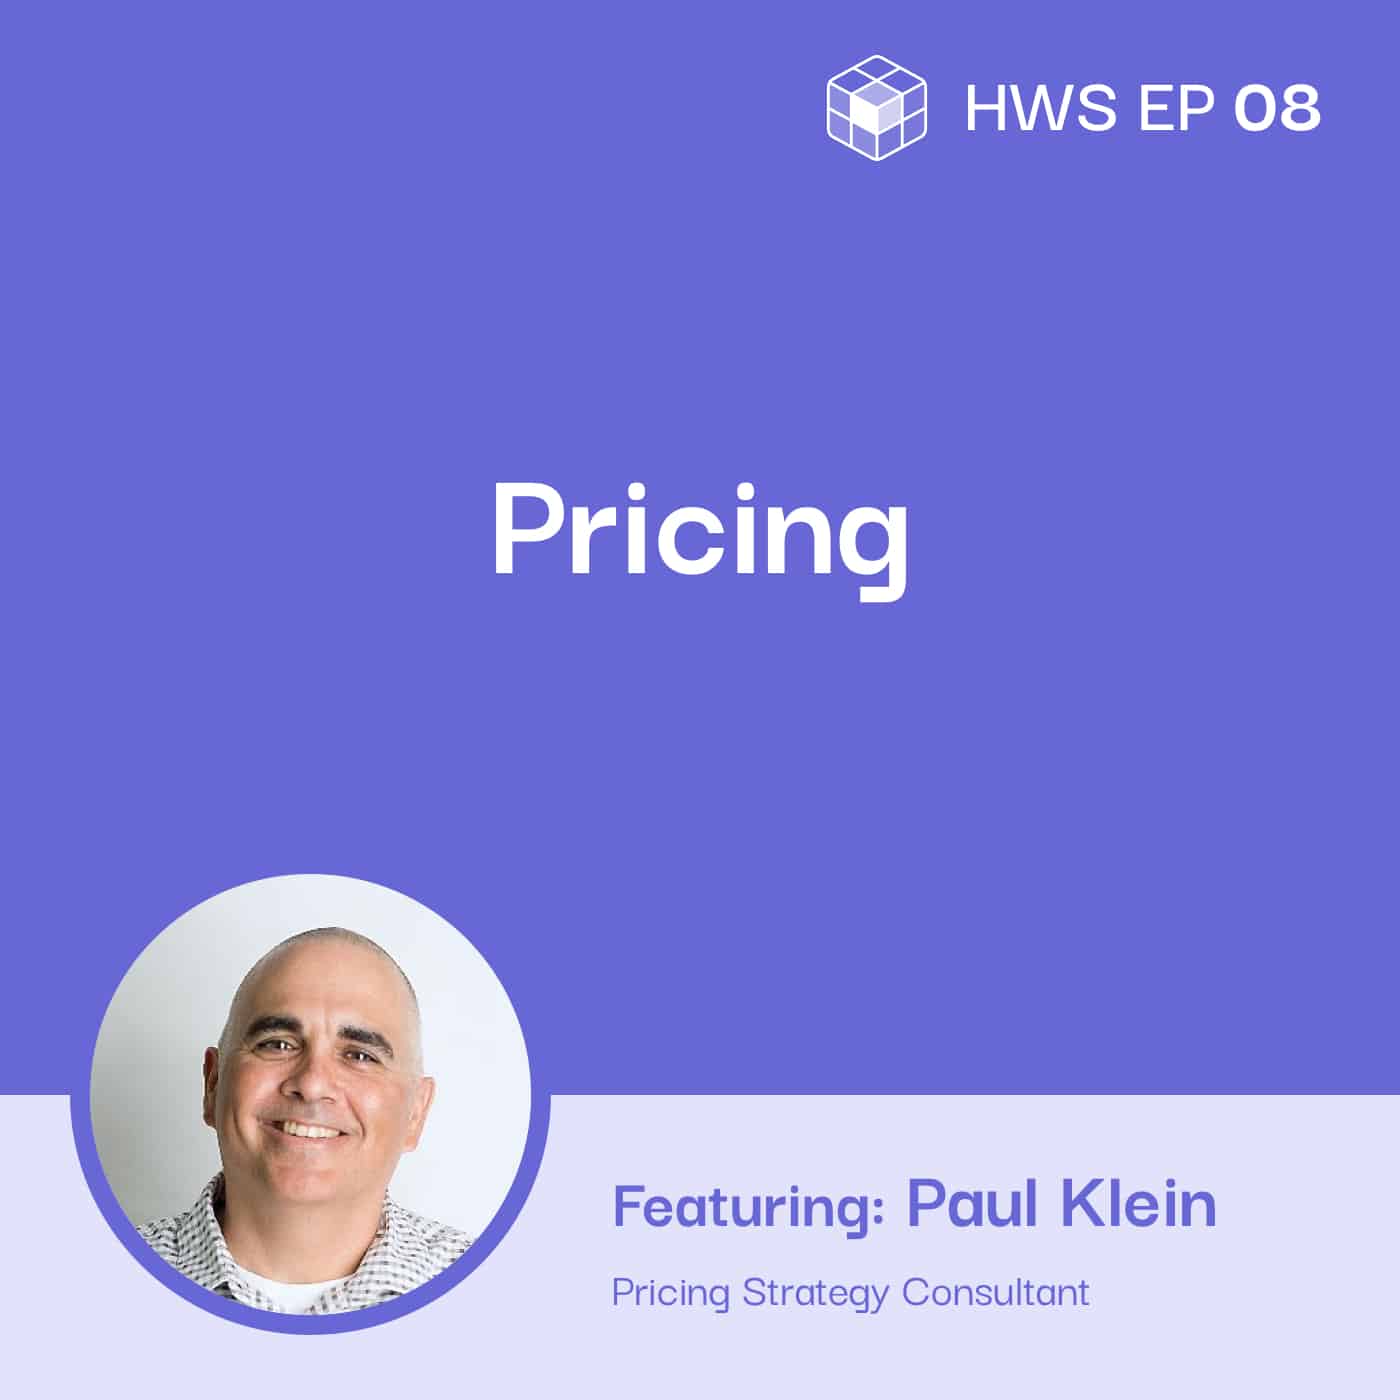 The 4 Step Process to Pricing for Value